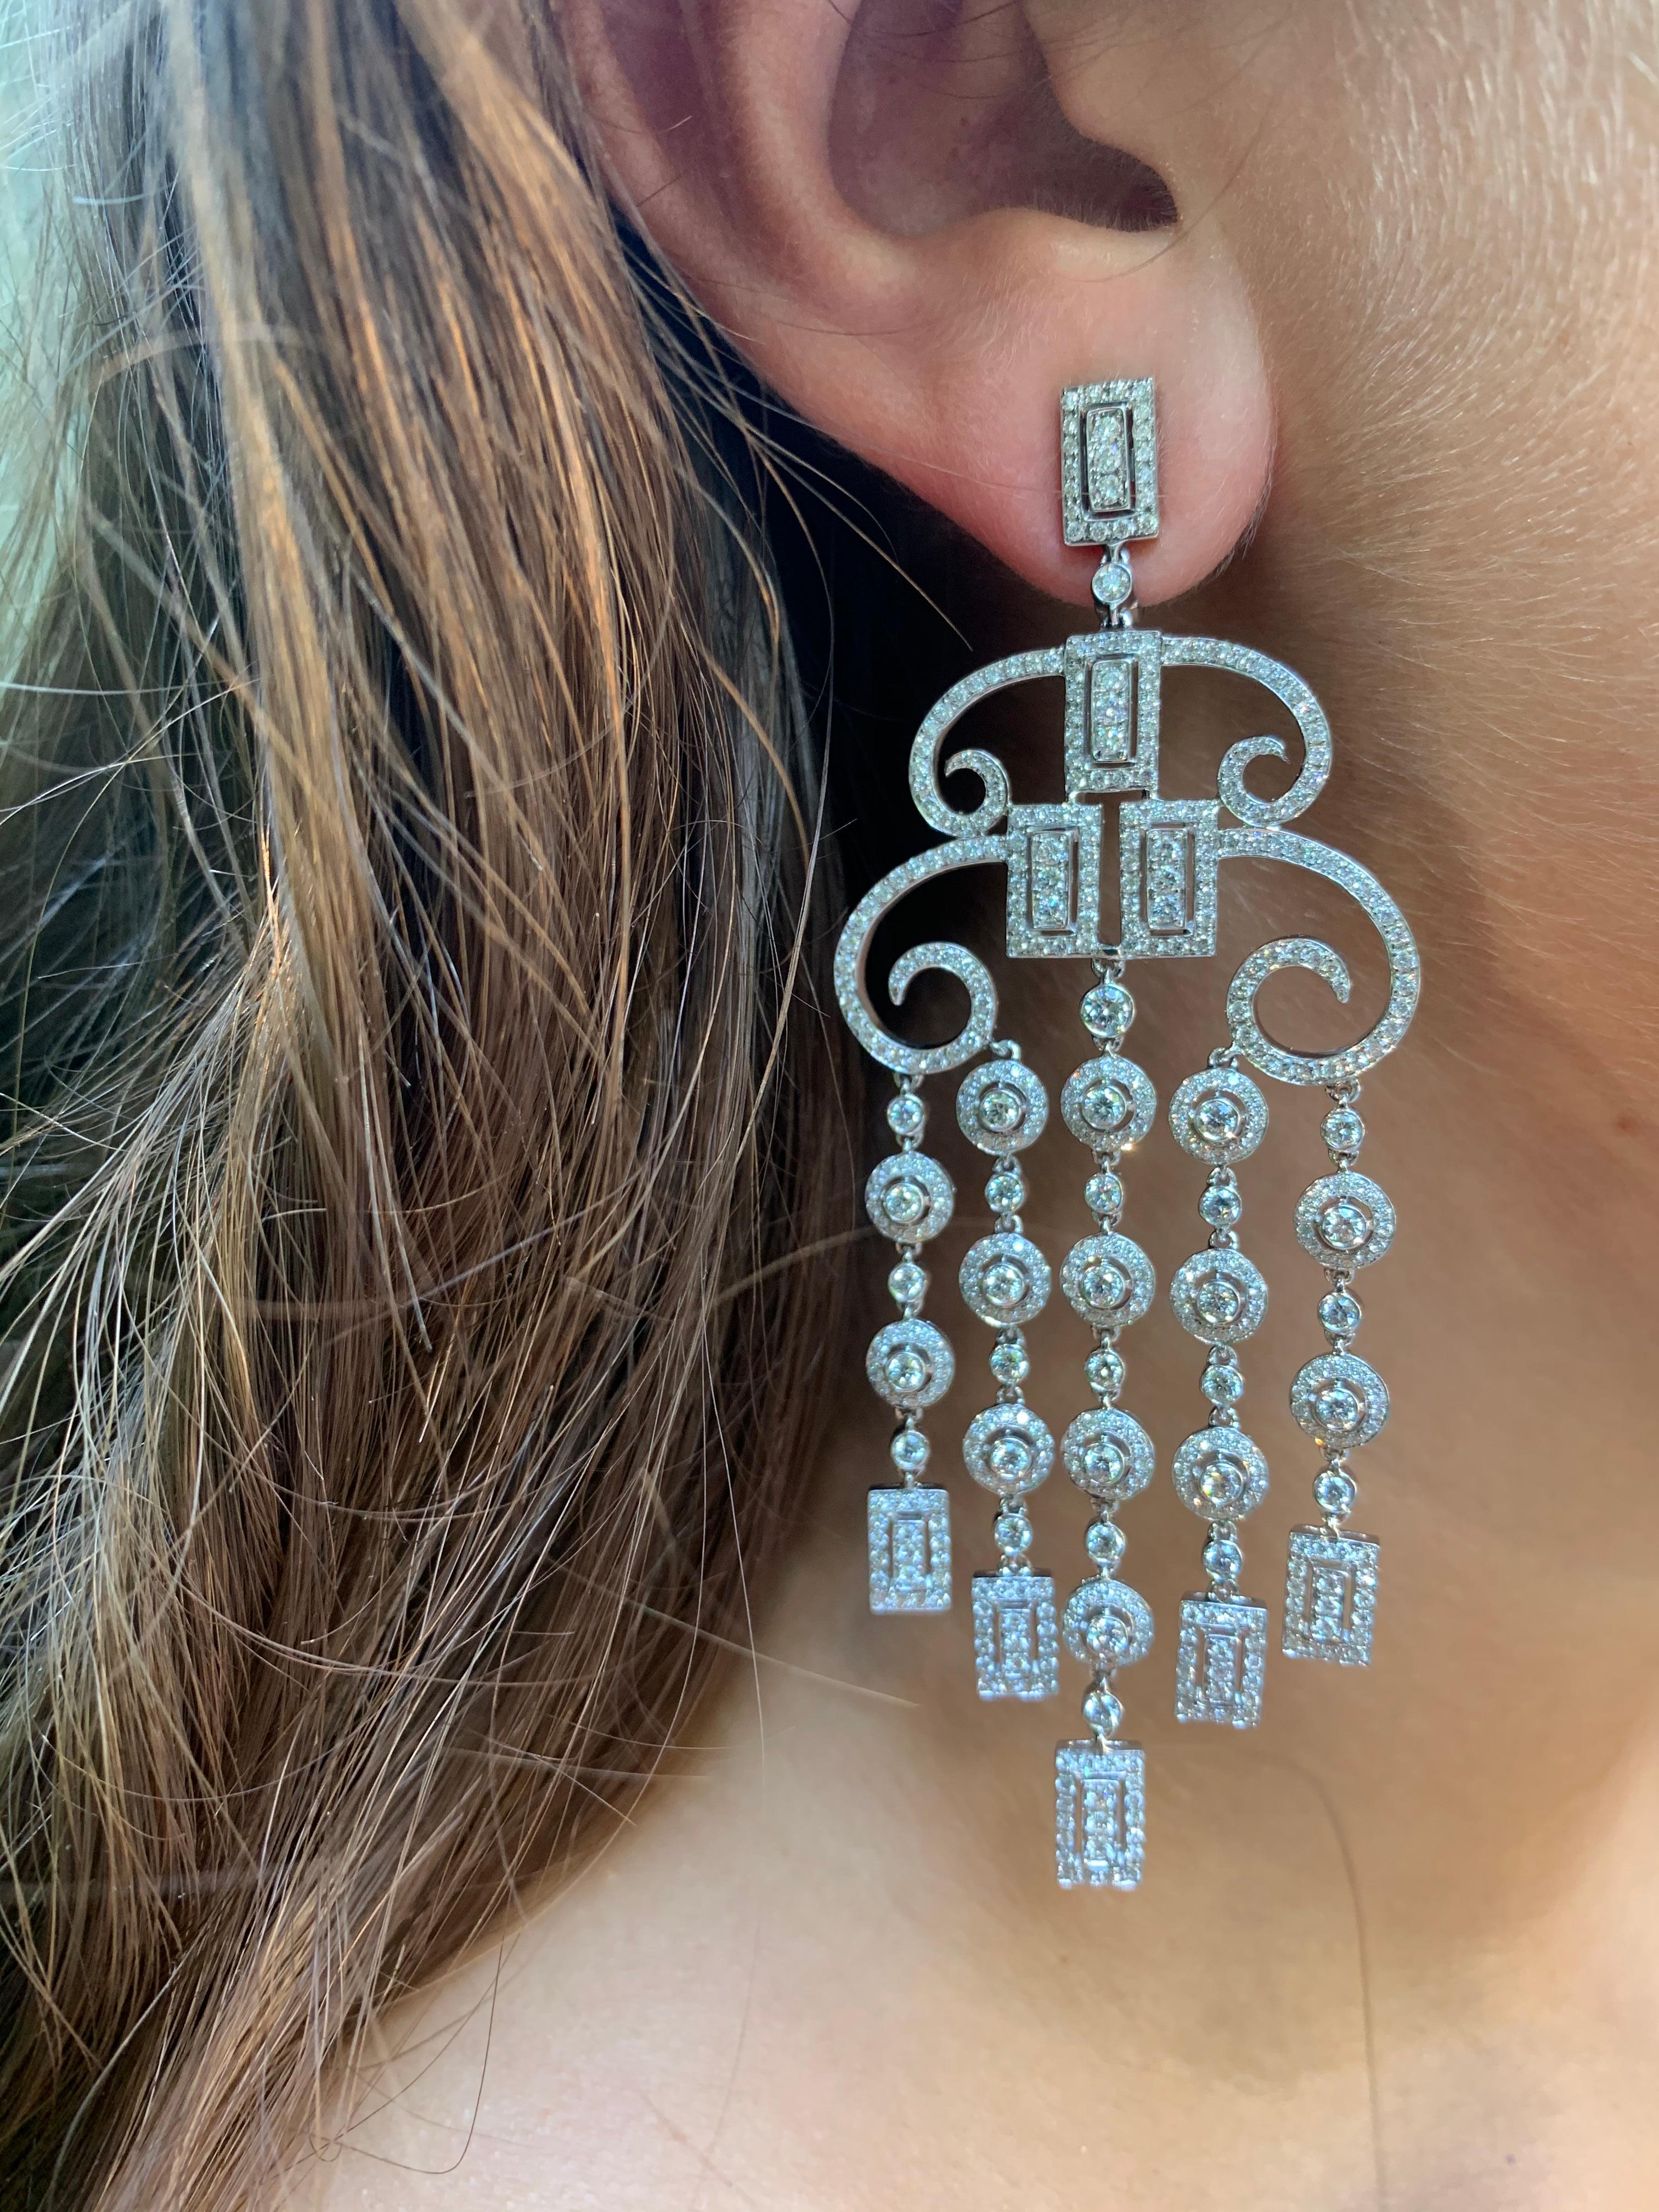 Fabulous, large, glamorous Art Deco style openwork diamond and 18K white gold chandelier earrings. Round cut diamonds total weight approximately 6 carats. Diamonds G-H, VS.
3.4 inches long
Very fine quality
Classic circles, swirls and rectangles